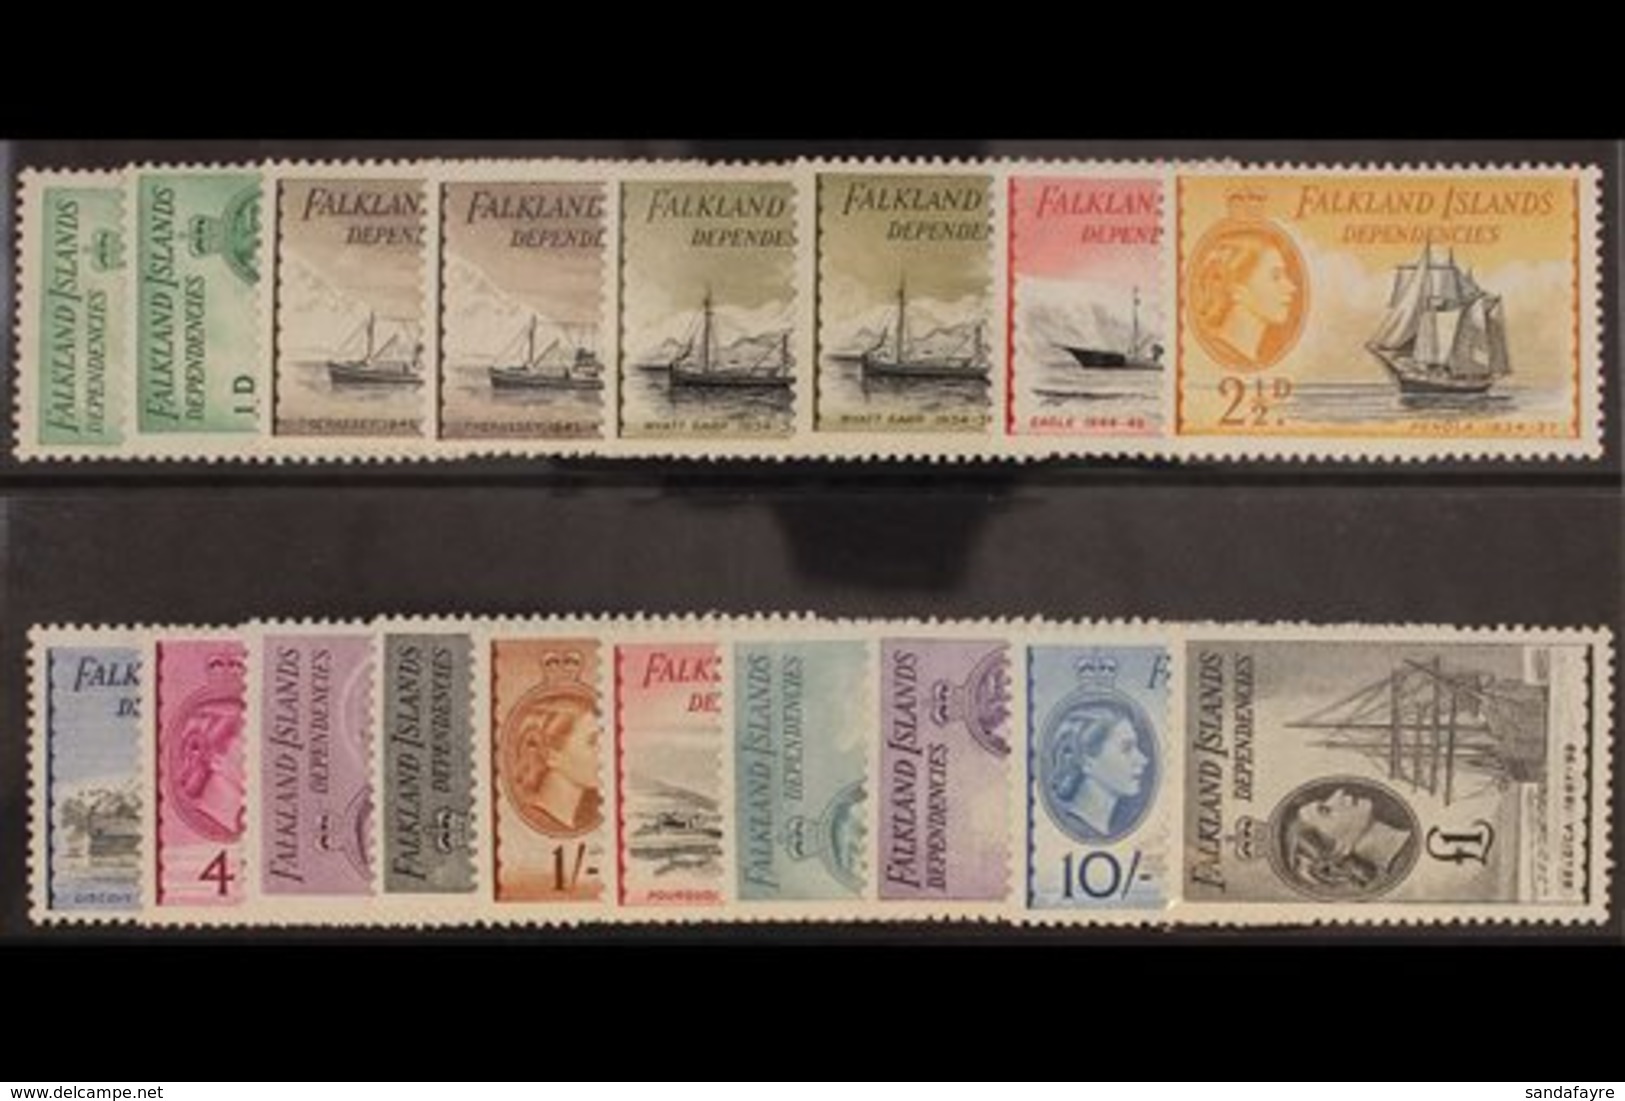 1954 Complete Set Including The DLR Printings,SG G26/40, G26a, 27b, 28a, Very Lighly Hinged Mint. (18 Stamps) For More I - Falkland